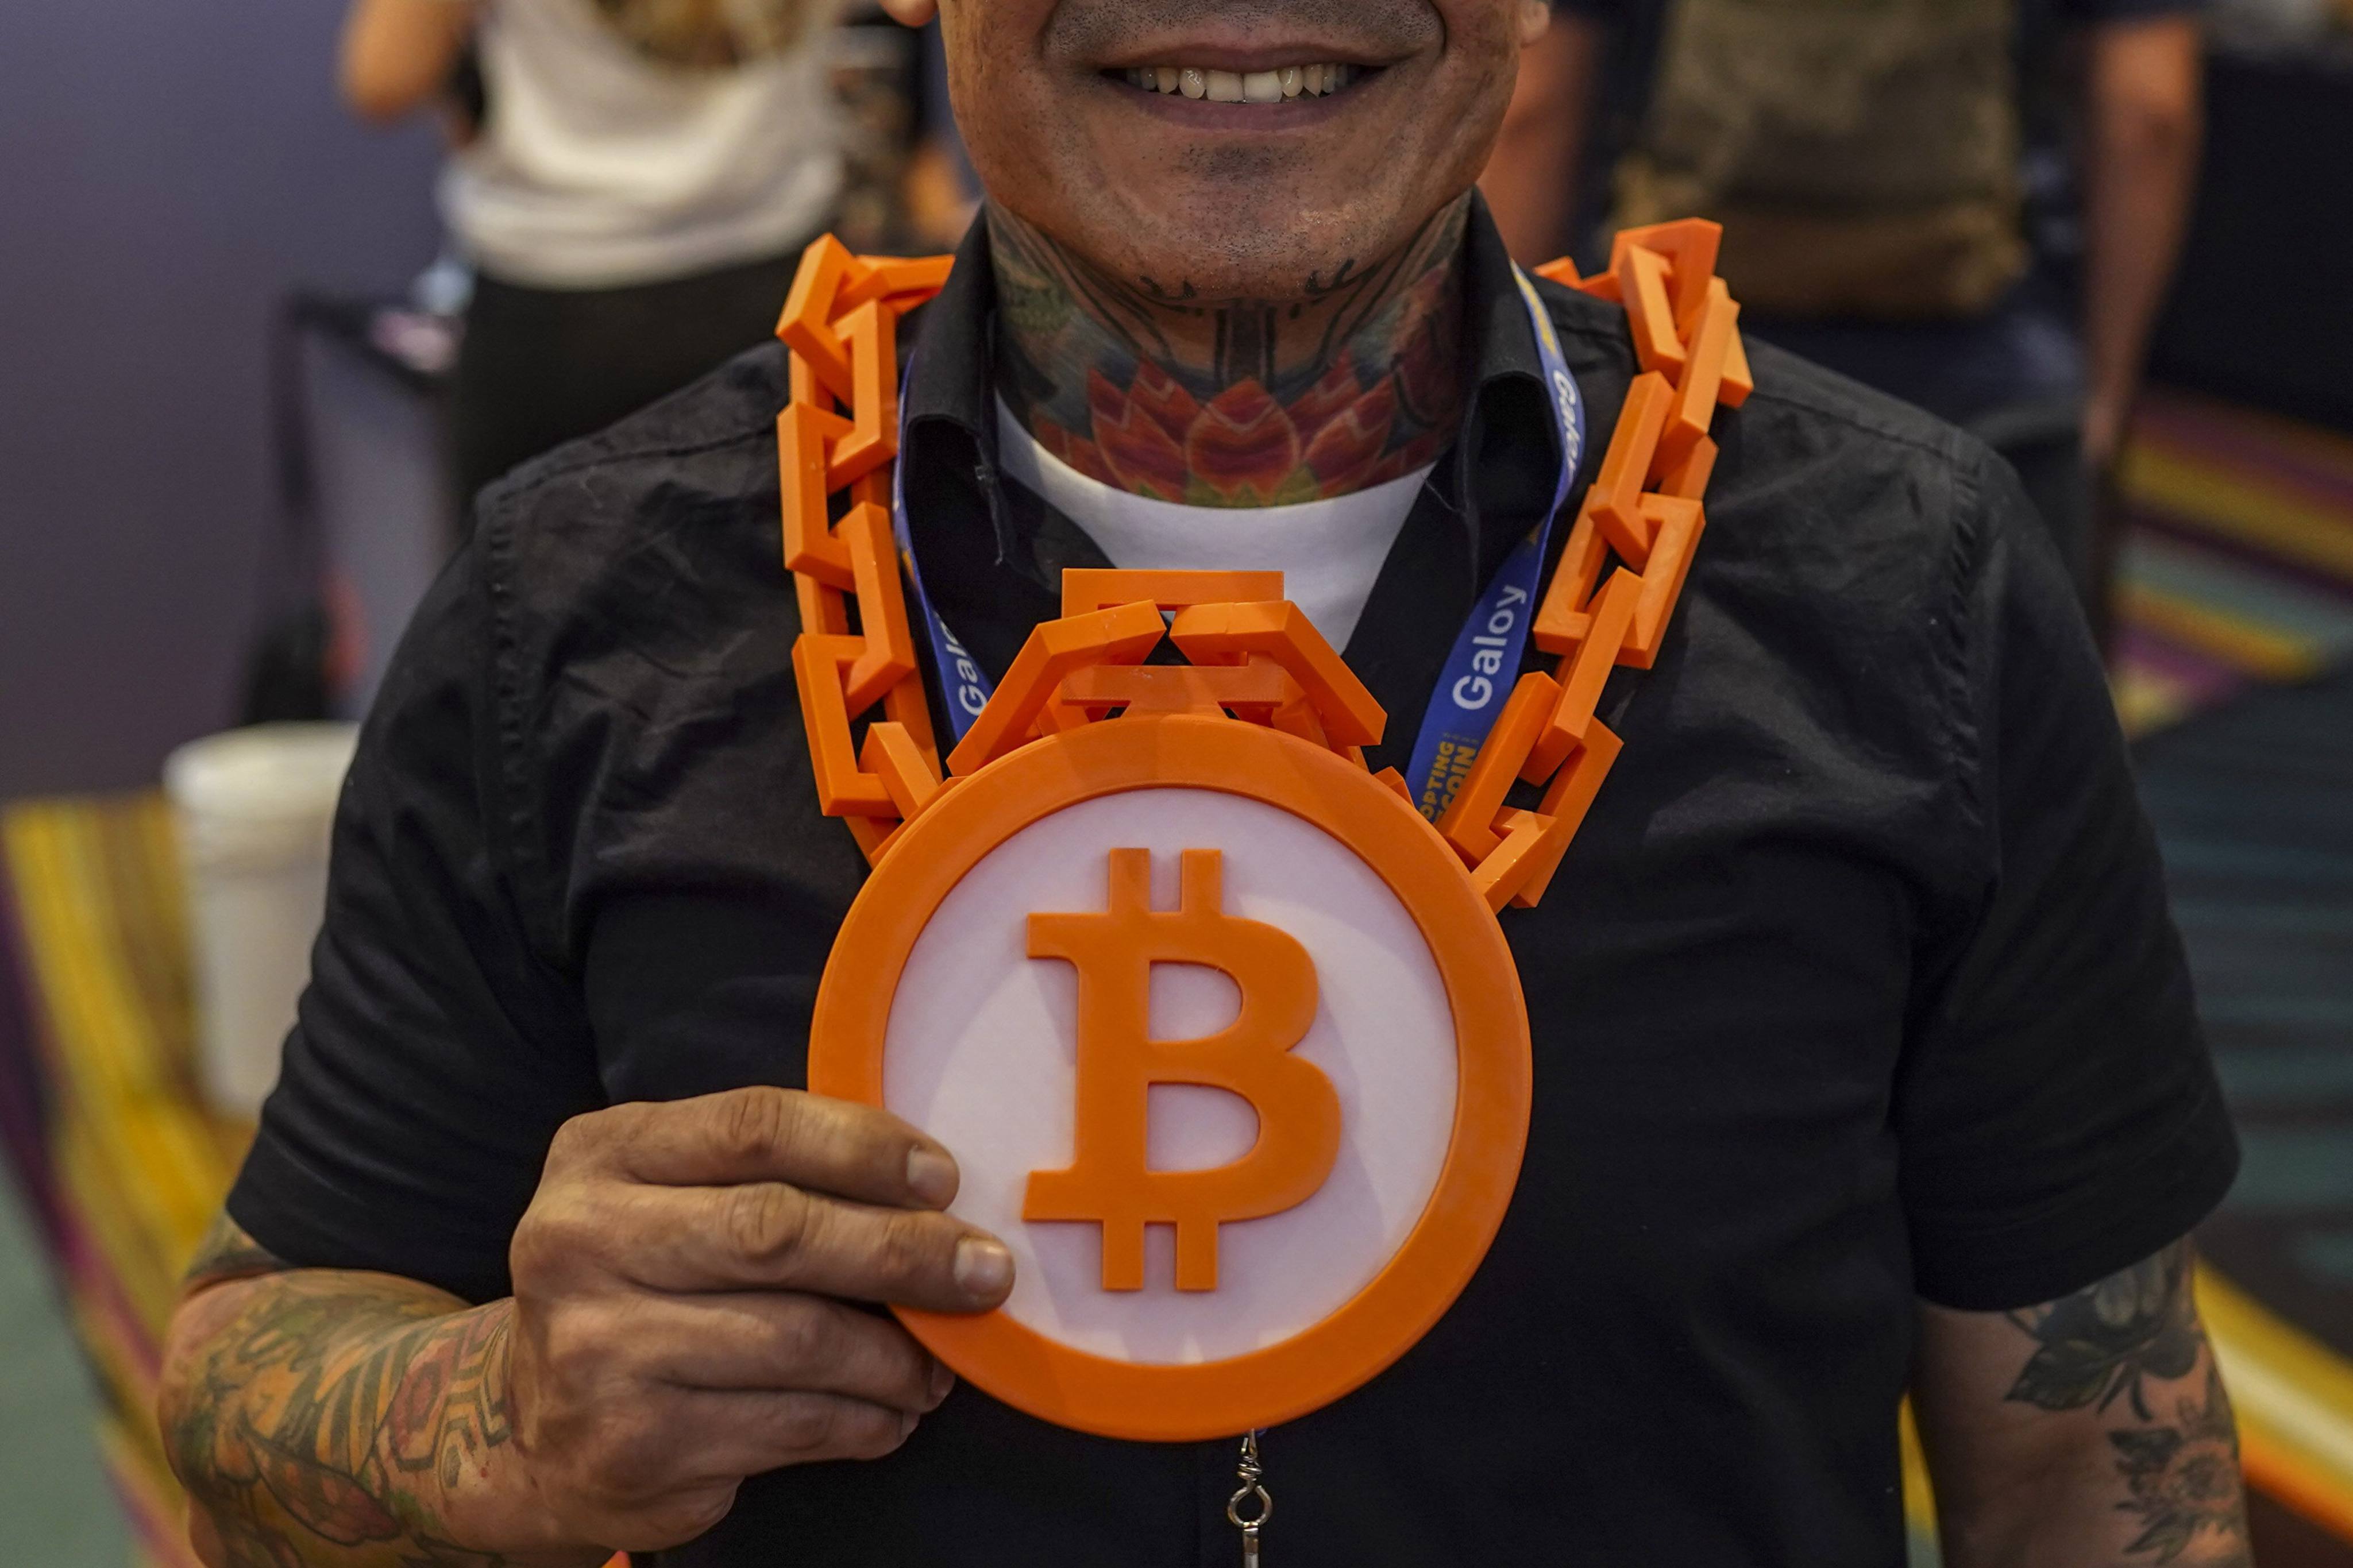 An attendee wearing a necklace featuring the Bitcoin logo during the Adopting Bitcoin summit in San Salvador, El Salvador, on November 7. The United States has a reputation for being the home of innovation, but the lack of clarify on cryptocurrency regulation has opened the door for other countries to emerge as hubs for the industry. Photo: Bloomberg